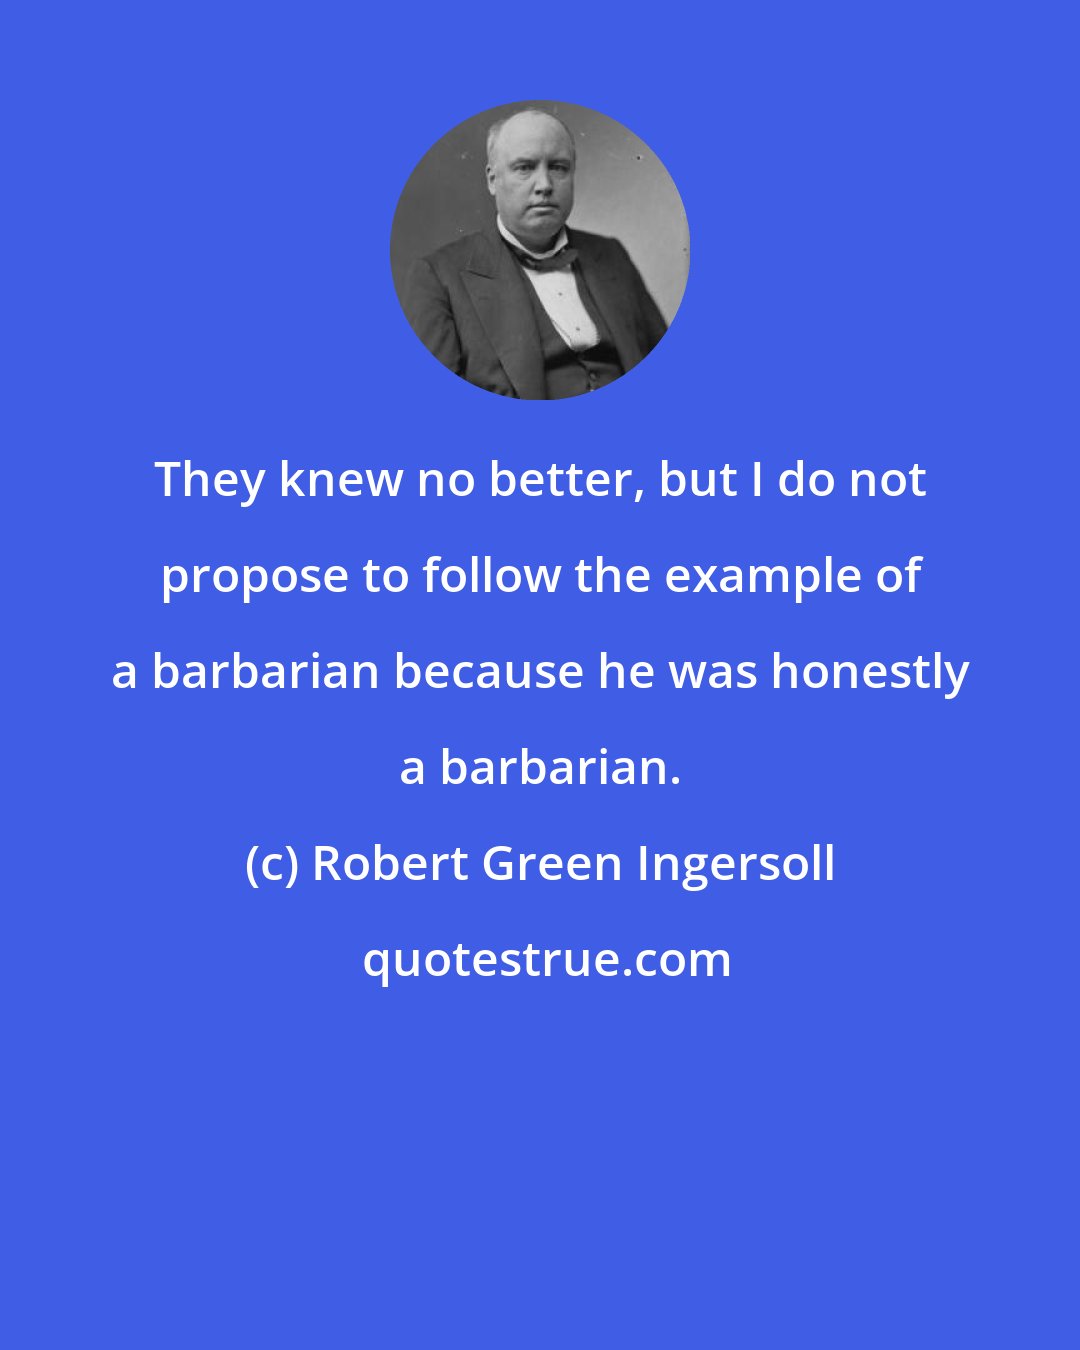 Robert Green Ingersoll: They knew no better, but I do not propose to follow the example of a barbarian because he was honestly a barbarian.